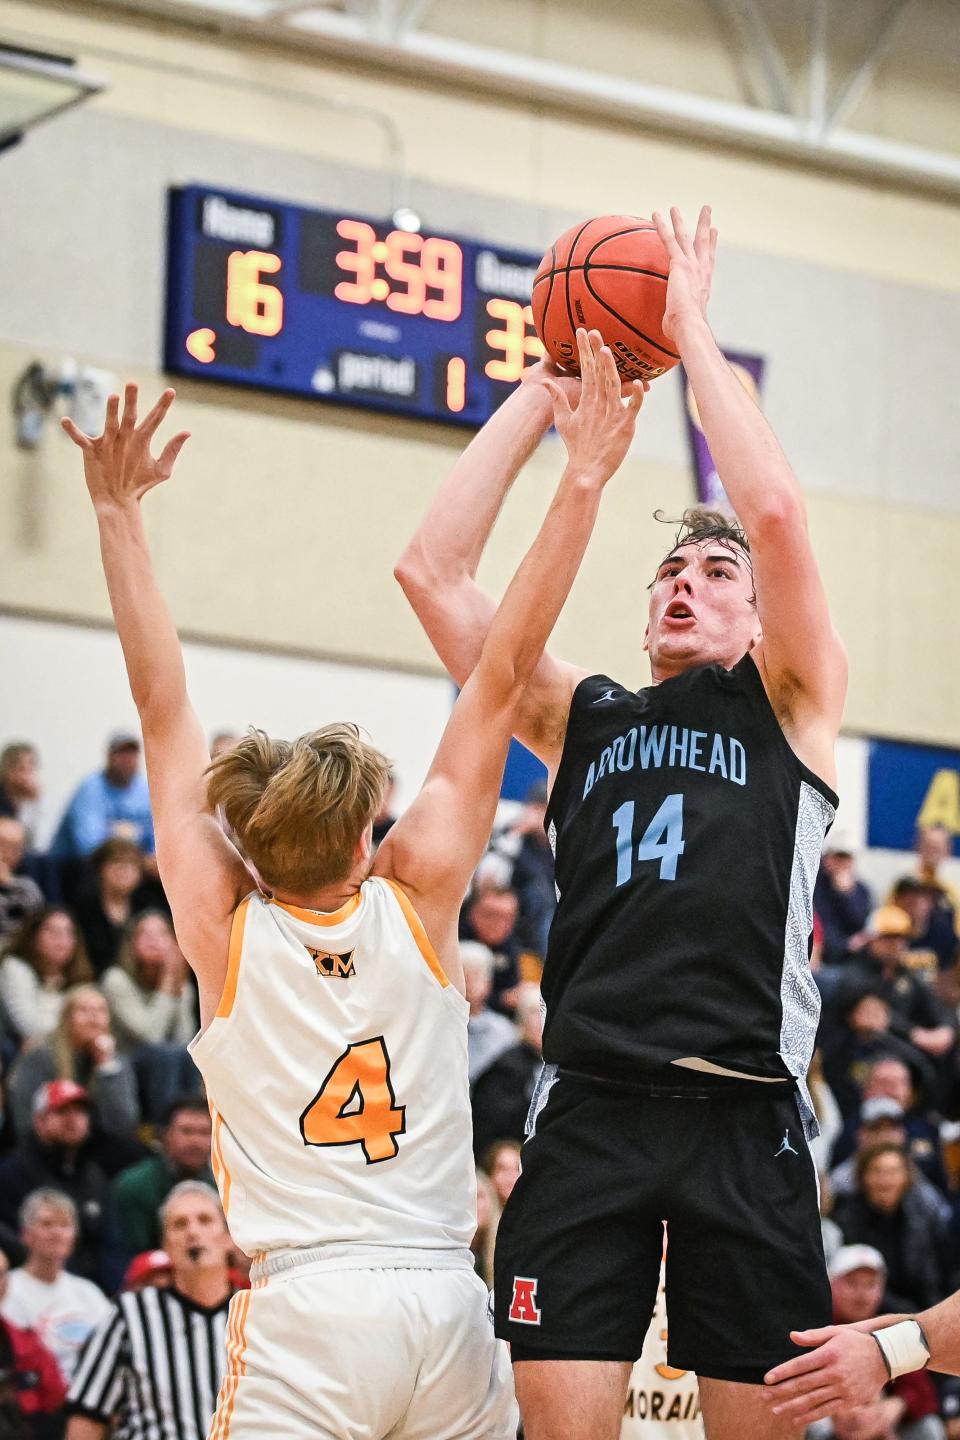 Bennett Basich (14) and Arrowhead got the better of Kettle Moraine in their December meeting, but the Lasers won the second, setting up the possibility their season series could be decided in the state championship game.